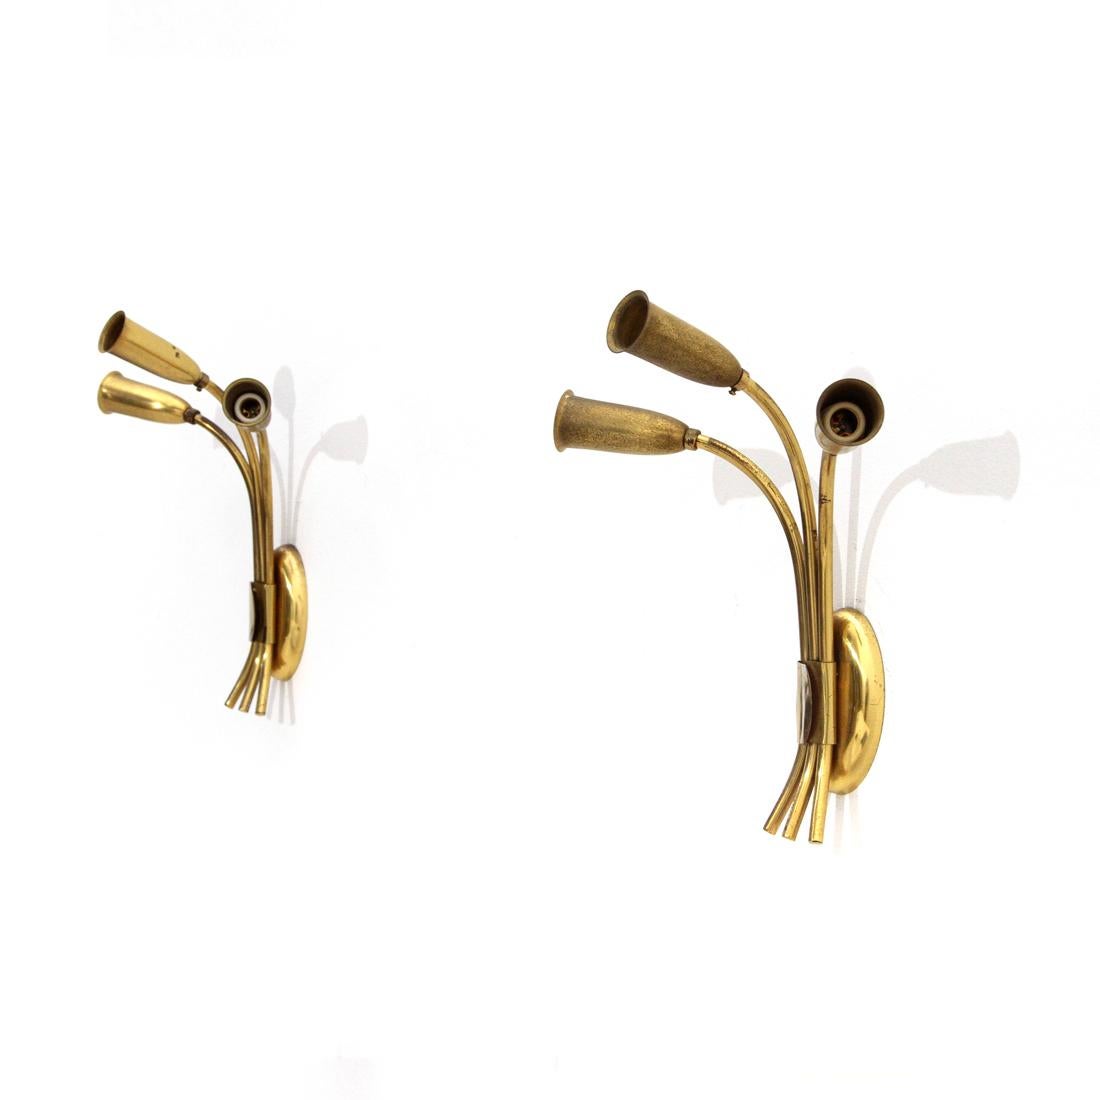 Pair of Midcentury Brass 3 Lights Italian Wall Lamps, 1950s For Sale 1